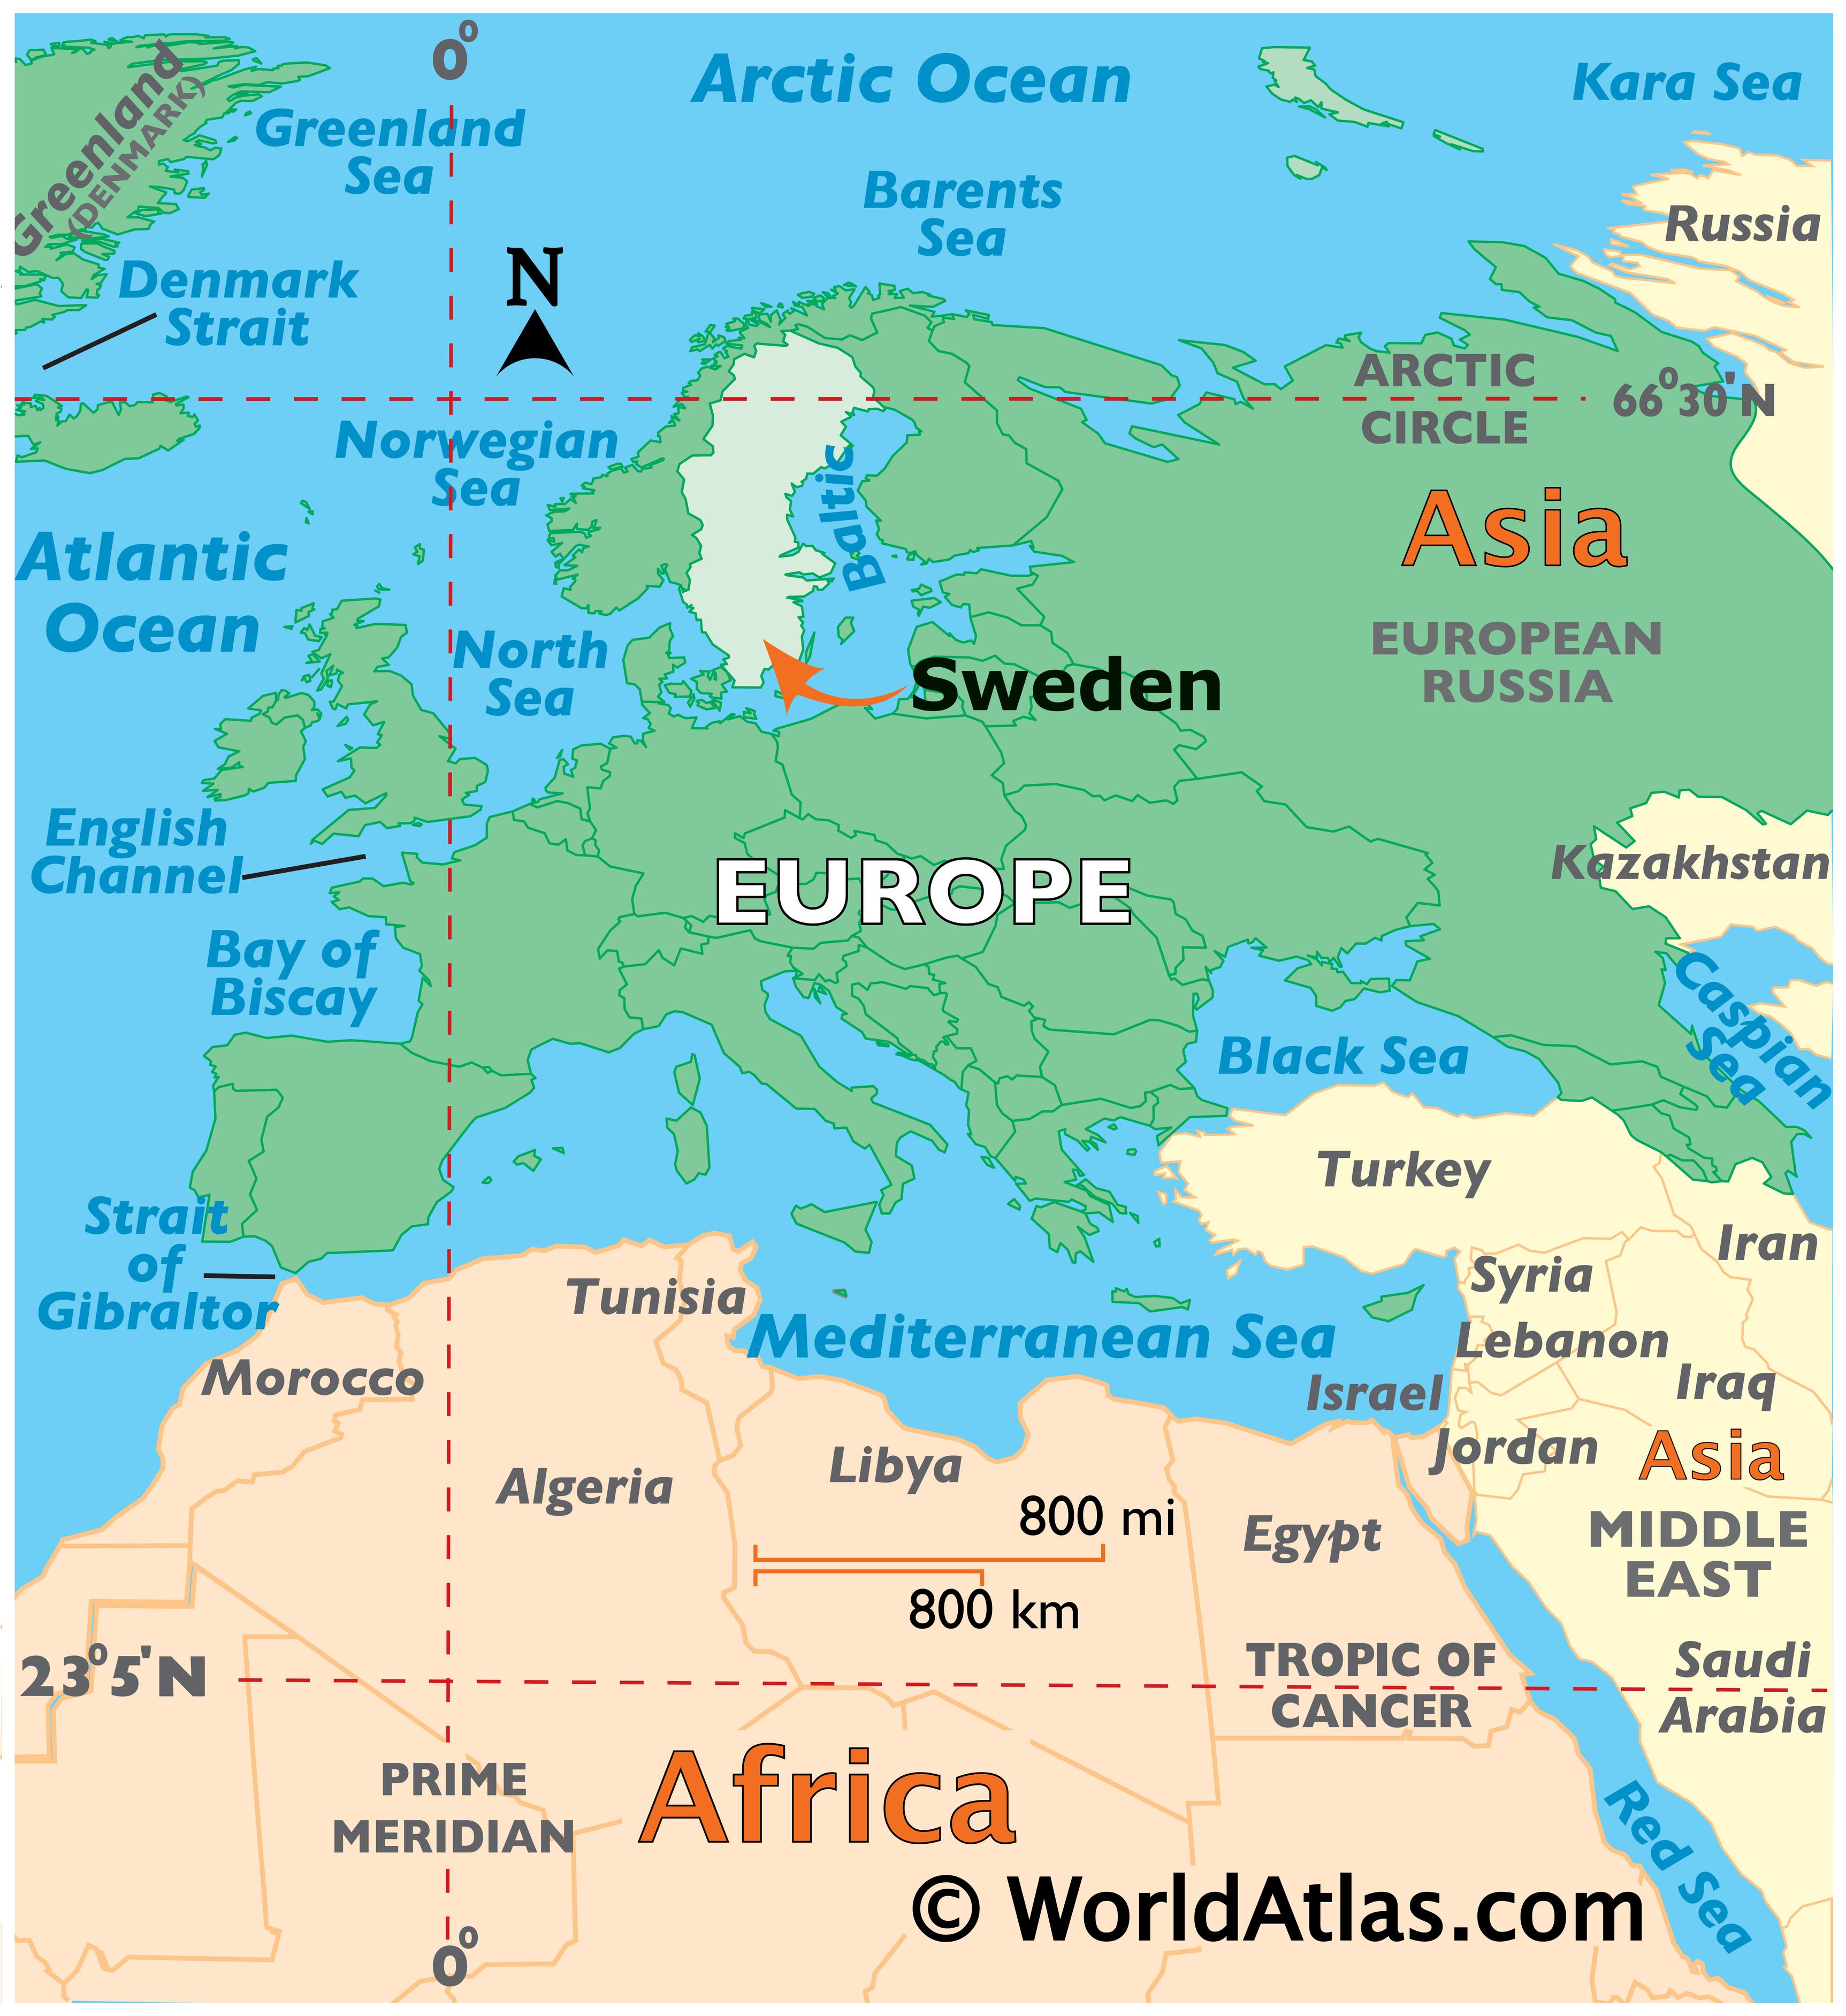 Sweden Map Of World Sweden Map / Geography of Sweden / Map of Sweden   Worldatlas.com